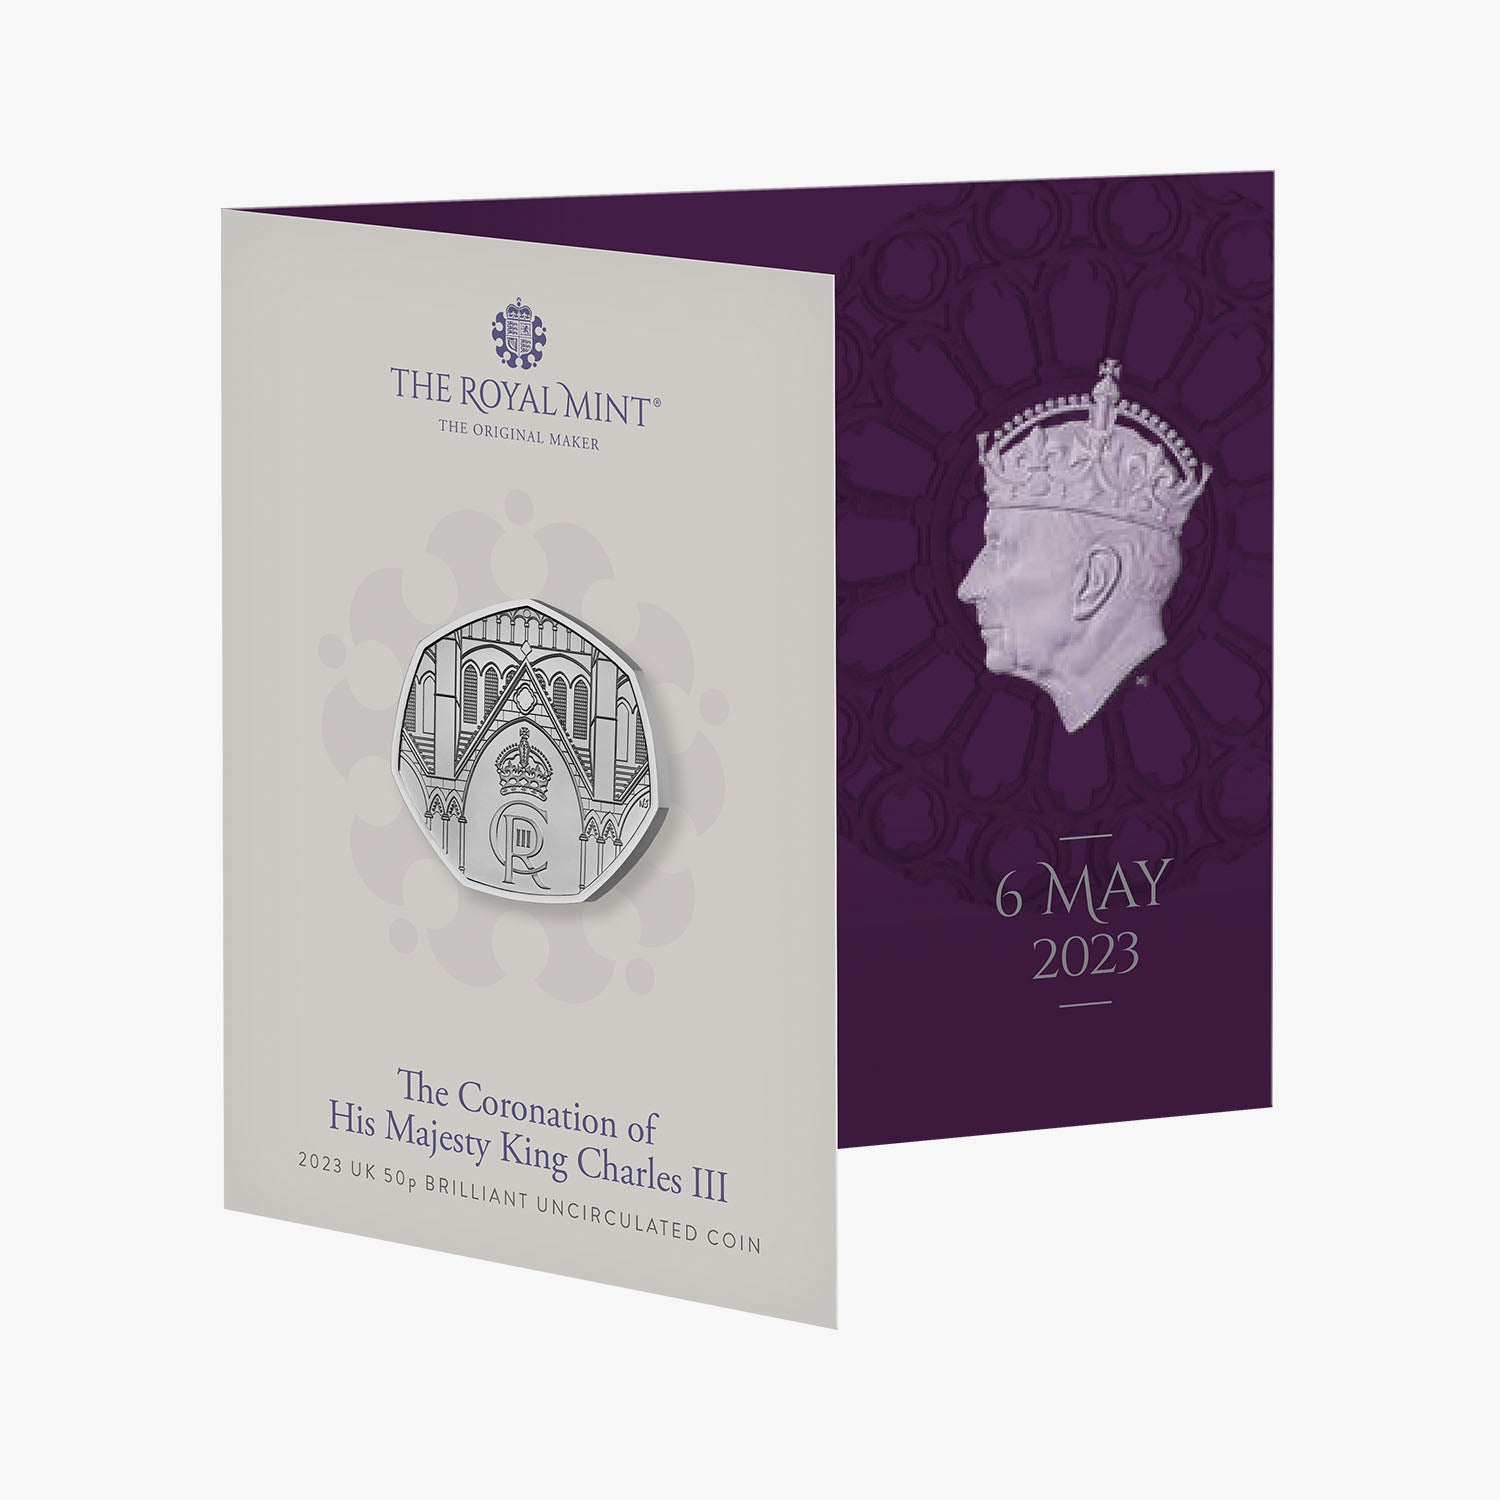 The Coronation of His Majesty King Charles III UK 50p Brilliant Uncirculated Coin